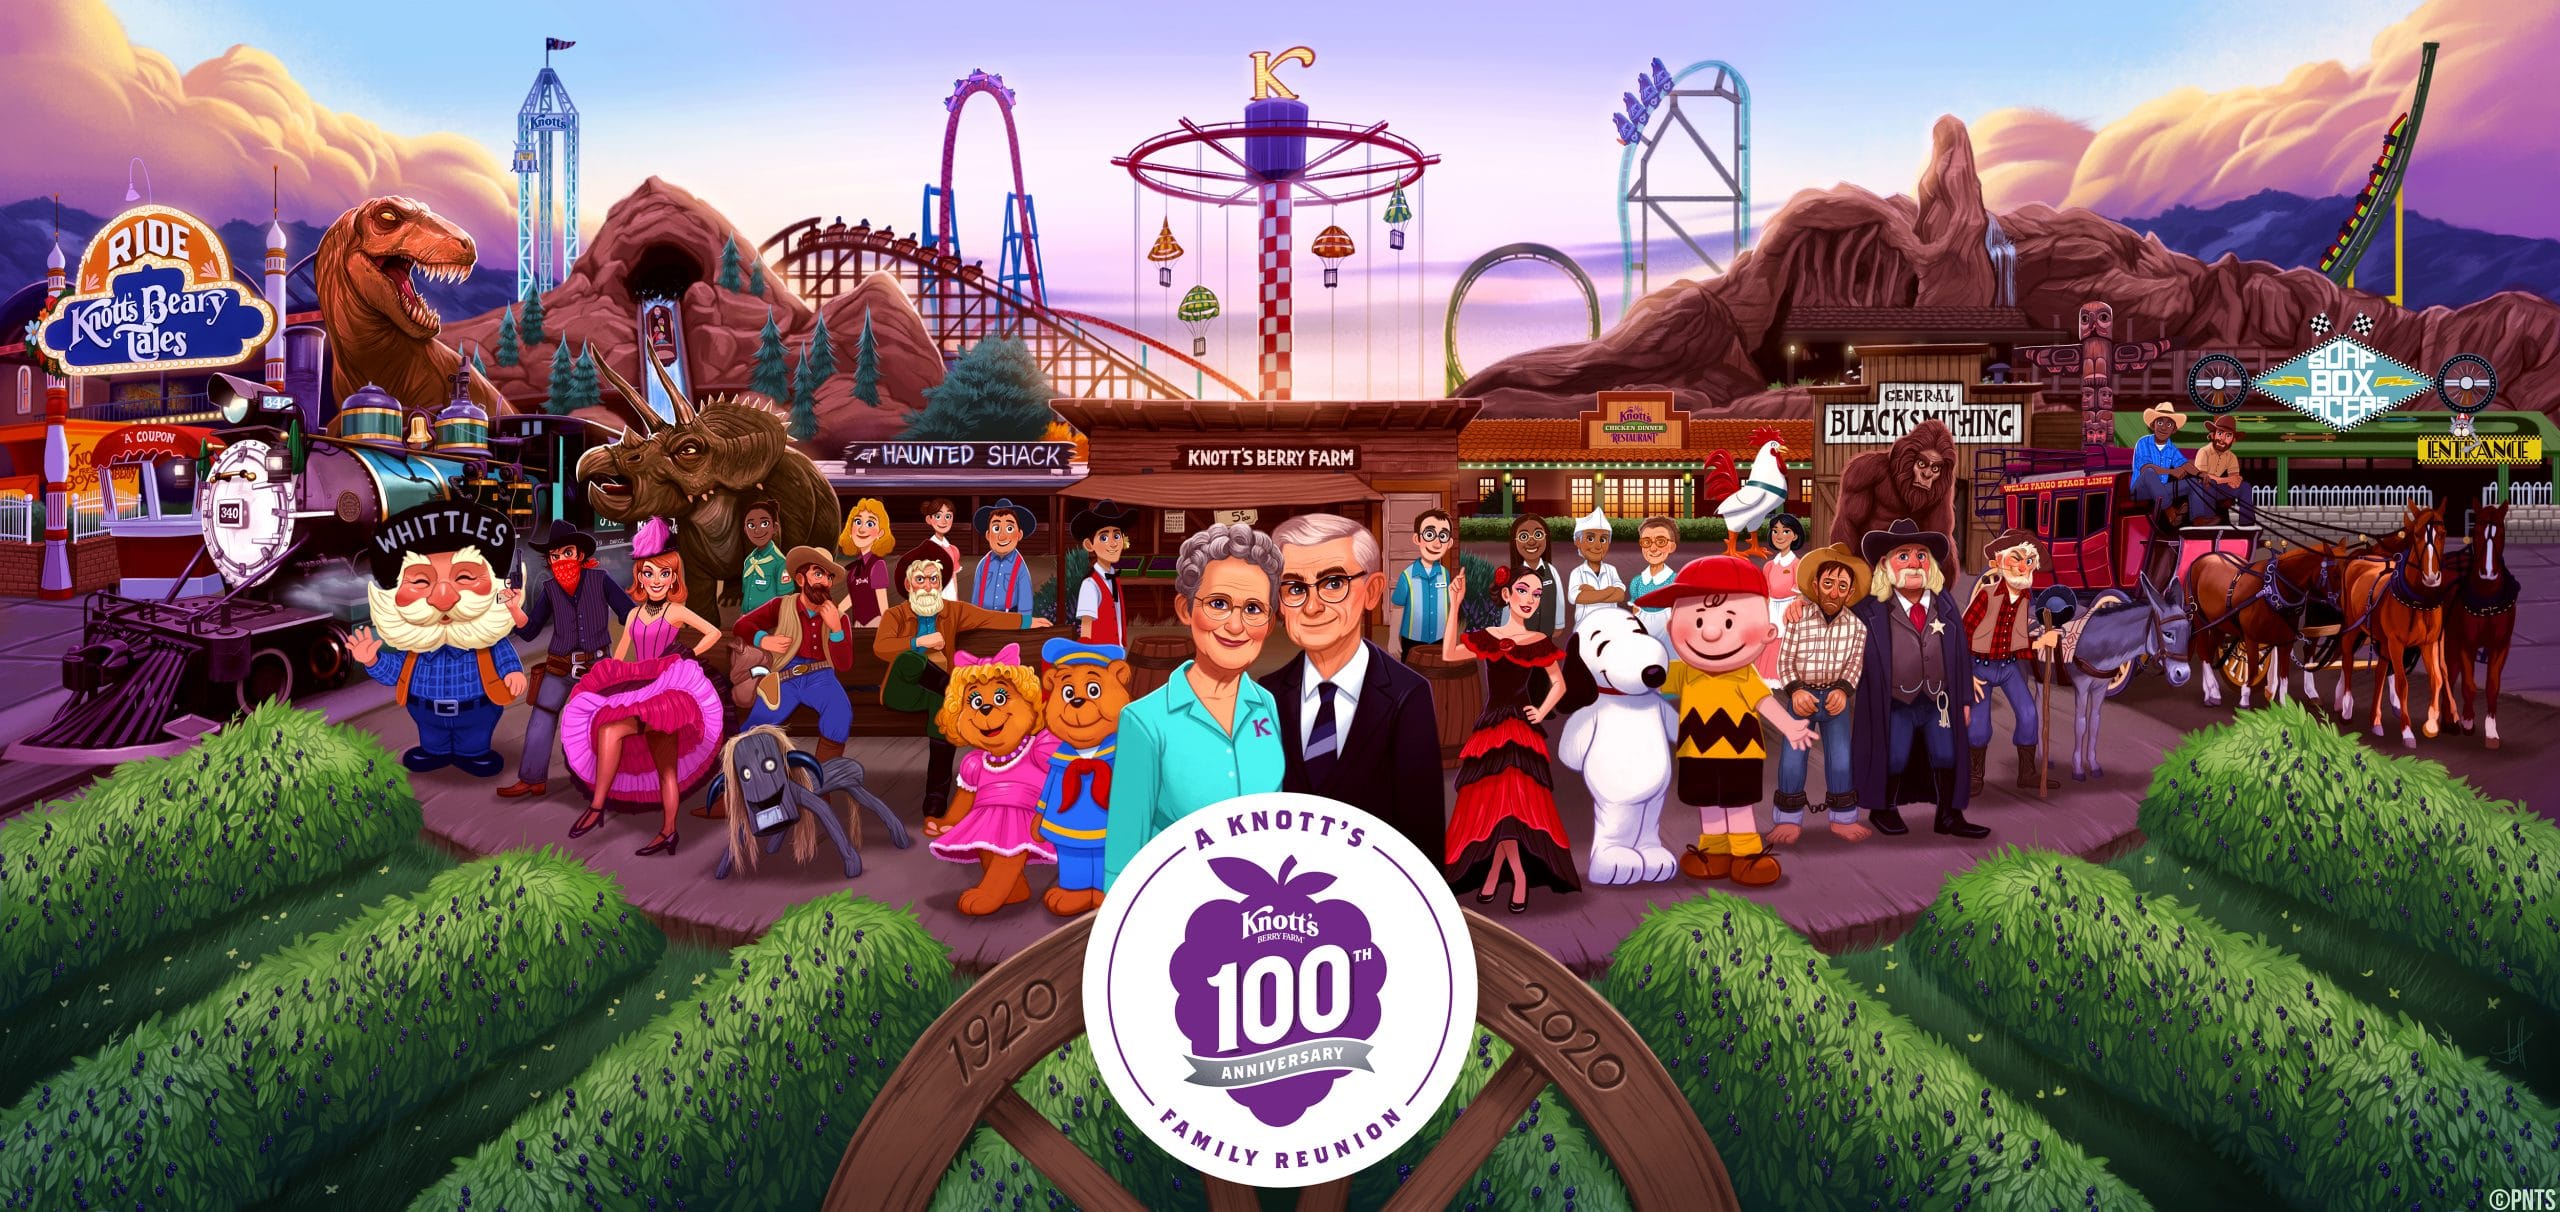 Knott’s Berry Farm to Bury Time Capsule in Ceremony for 100th Anniversary